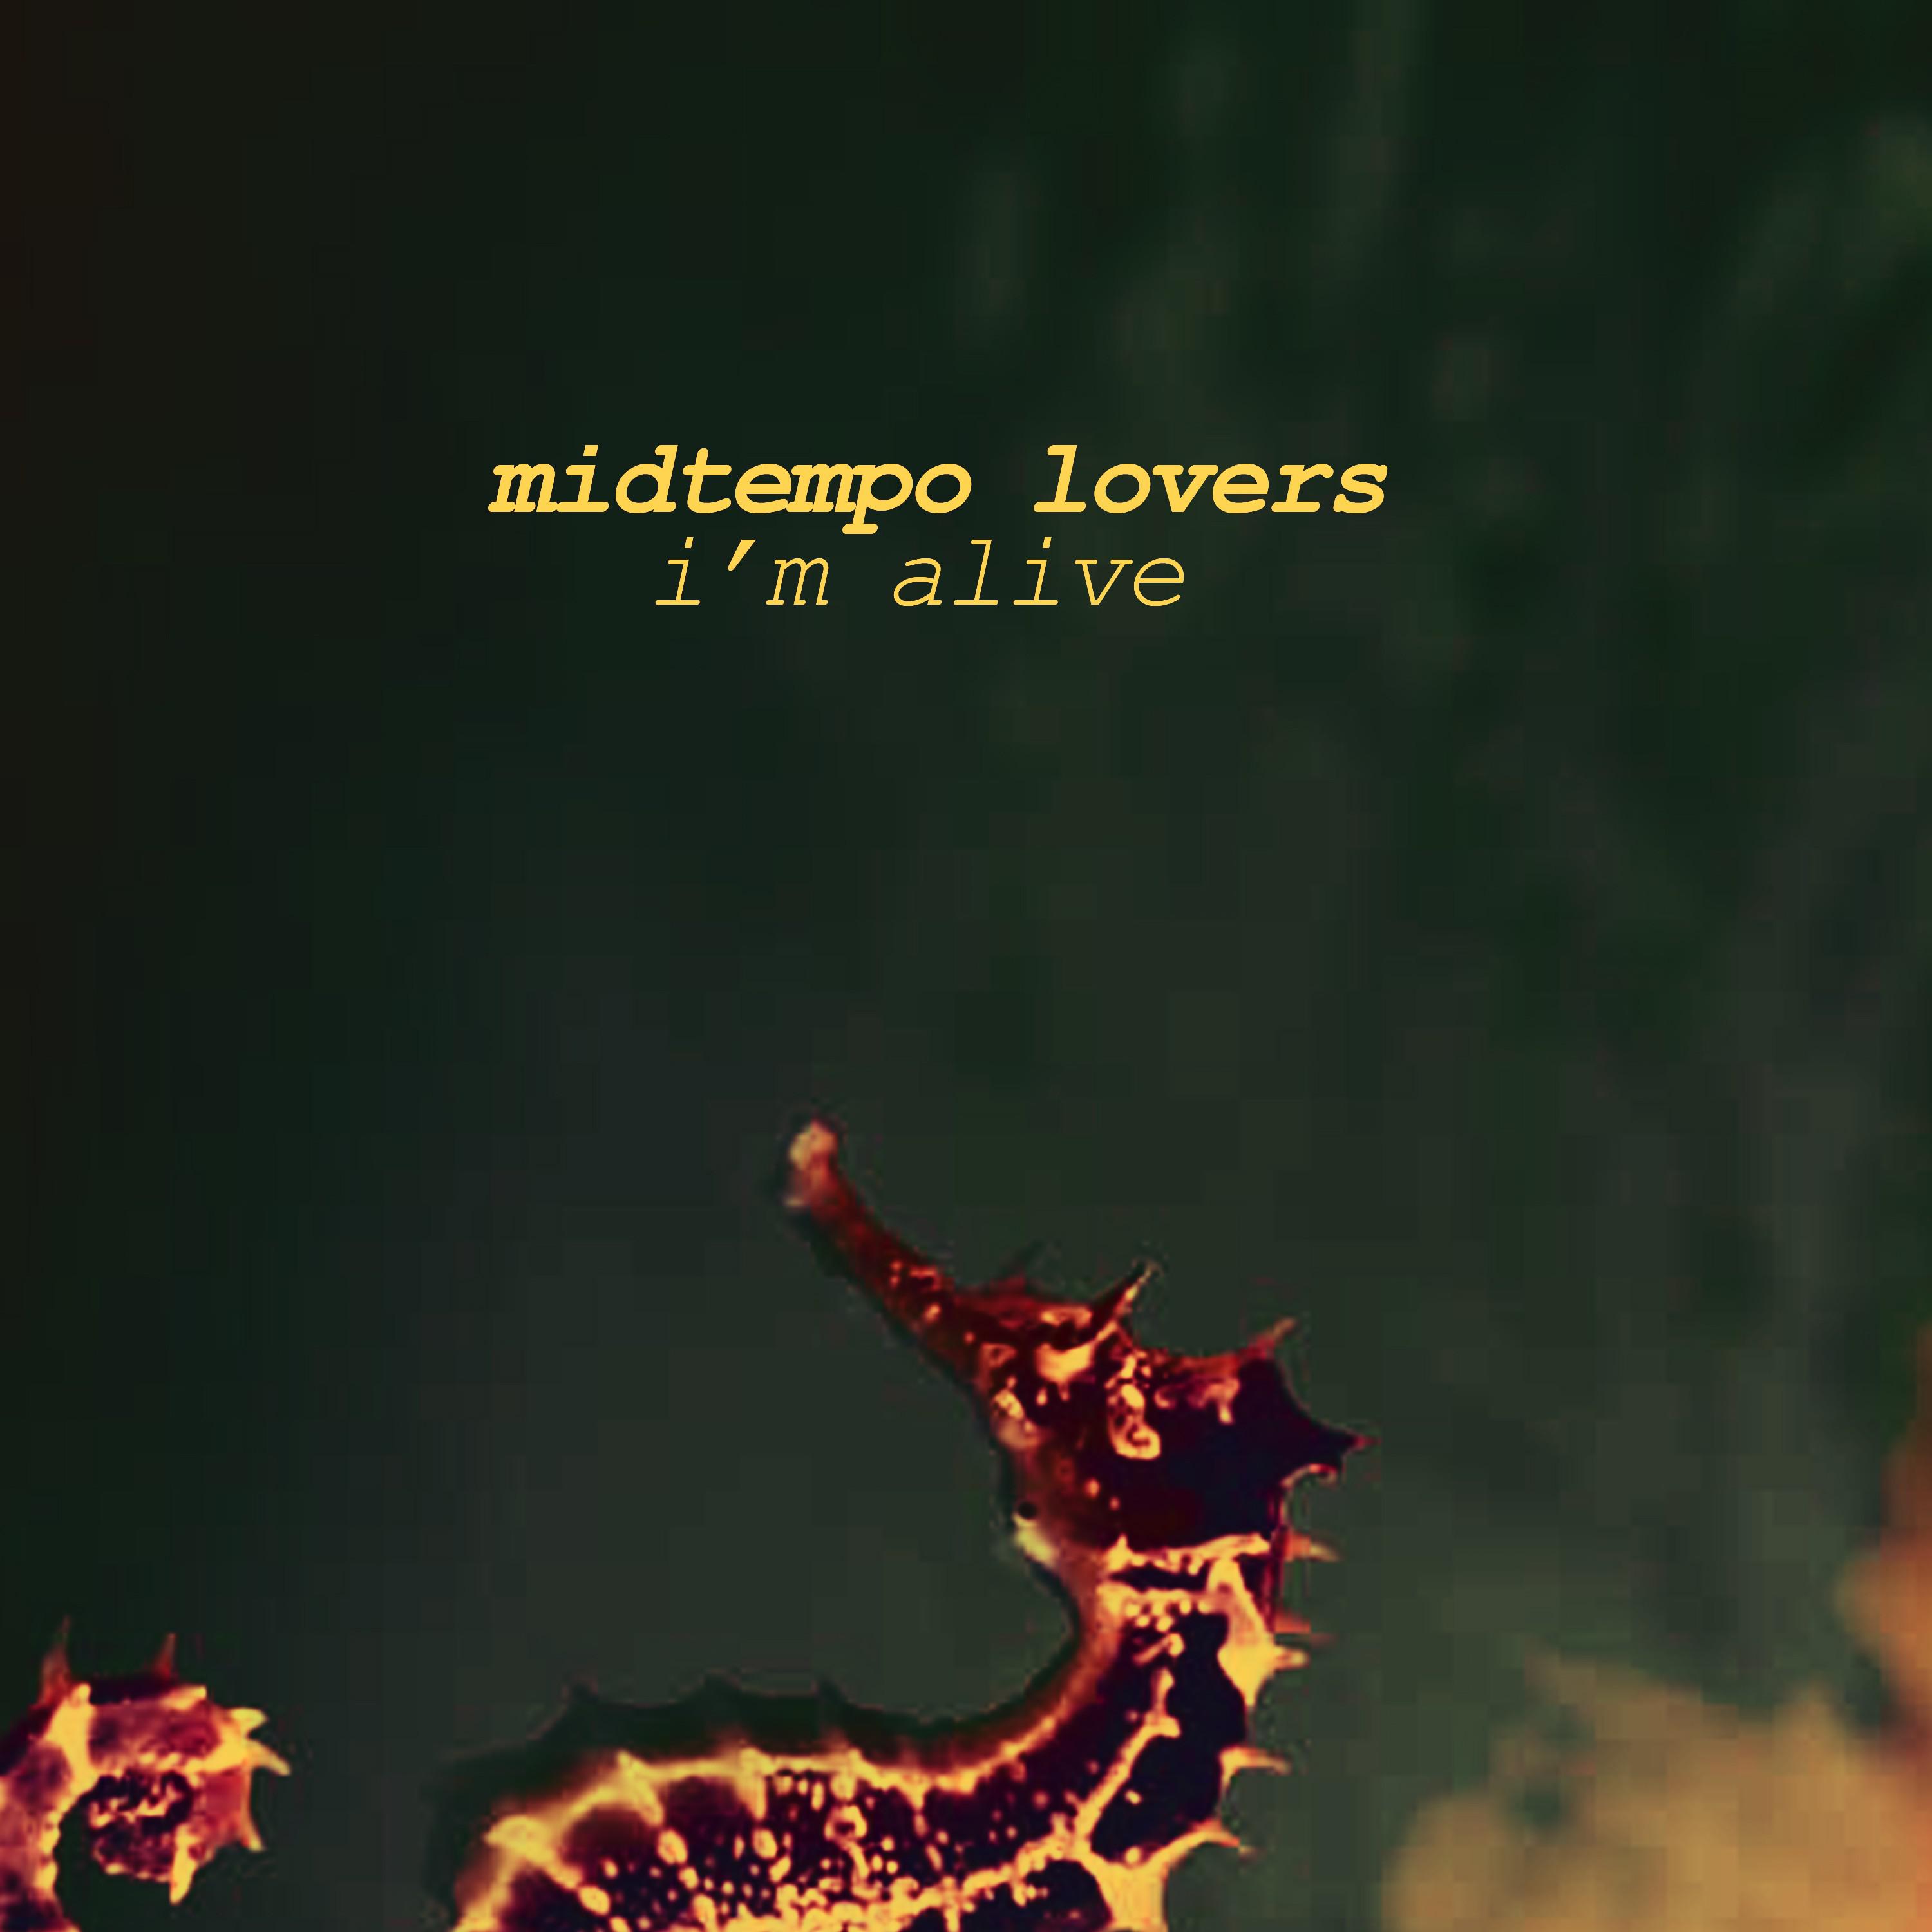 Midtempo Lovers - The Meaning of Life Is Discovering Our Gifts